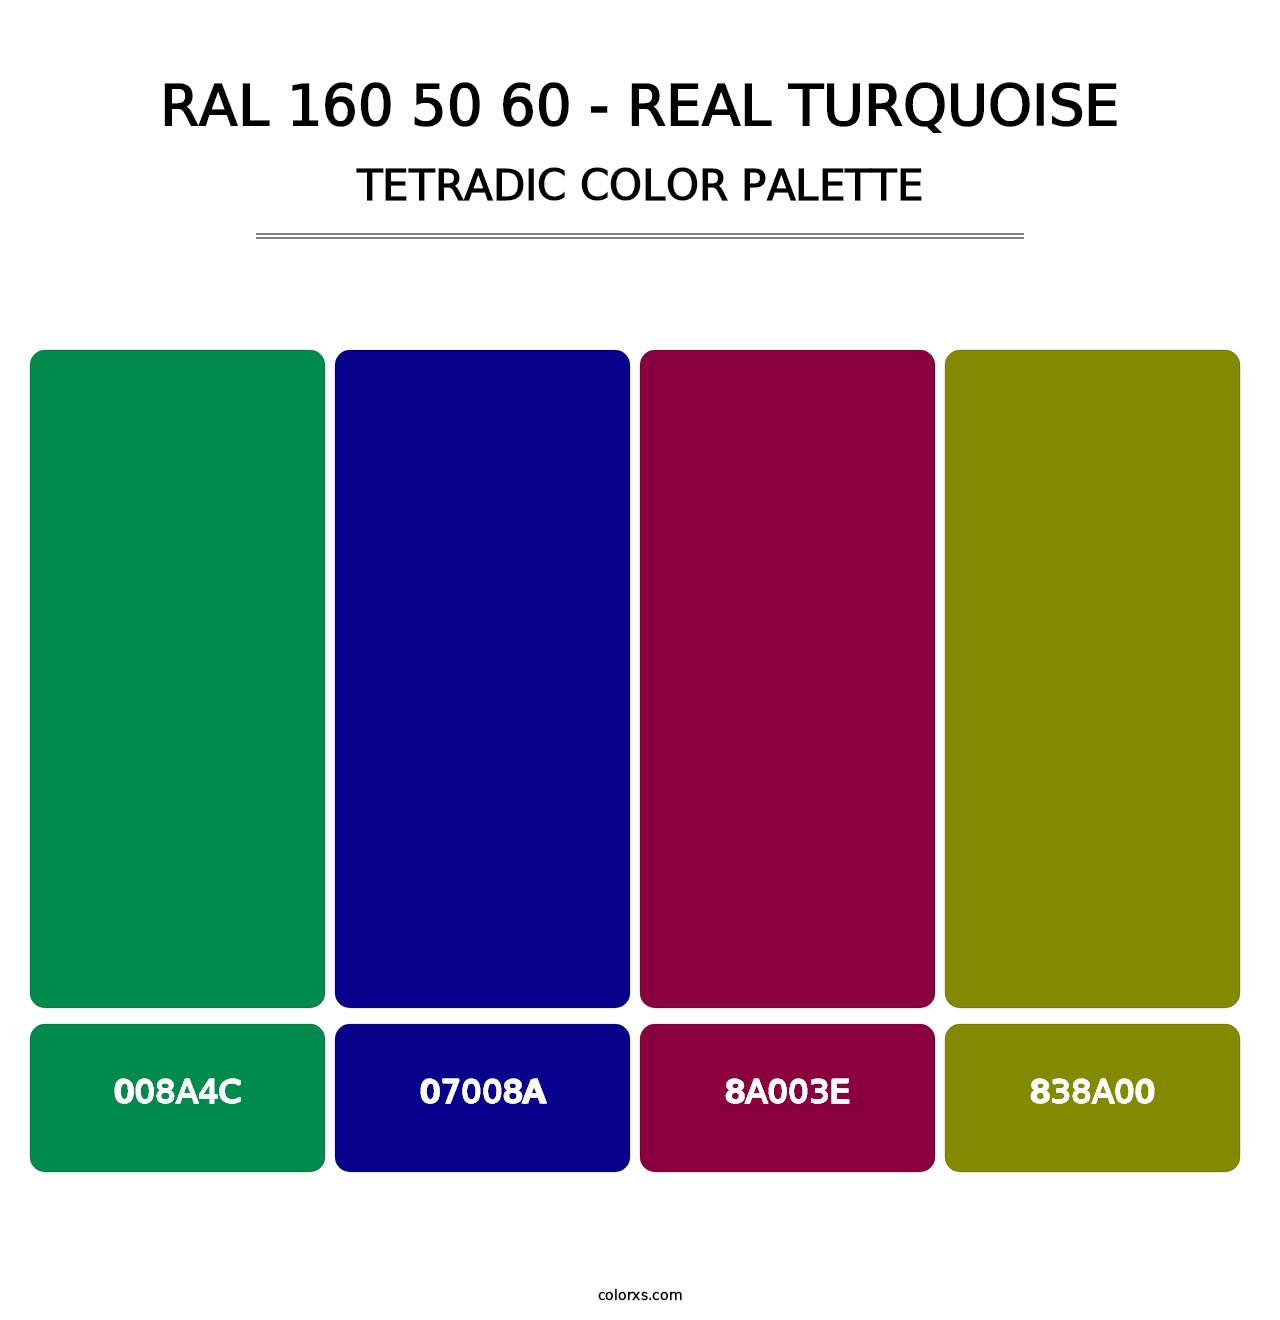 RAL 160 50 60 - Real Turquoise - Tetradic Color Palette